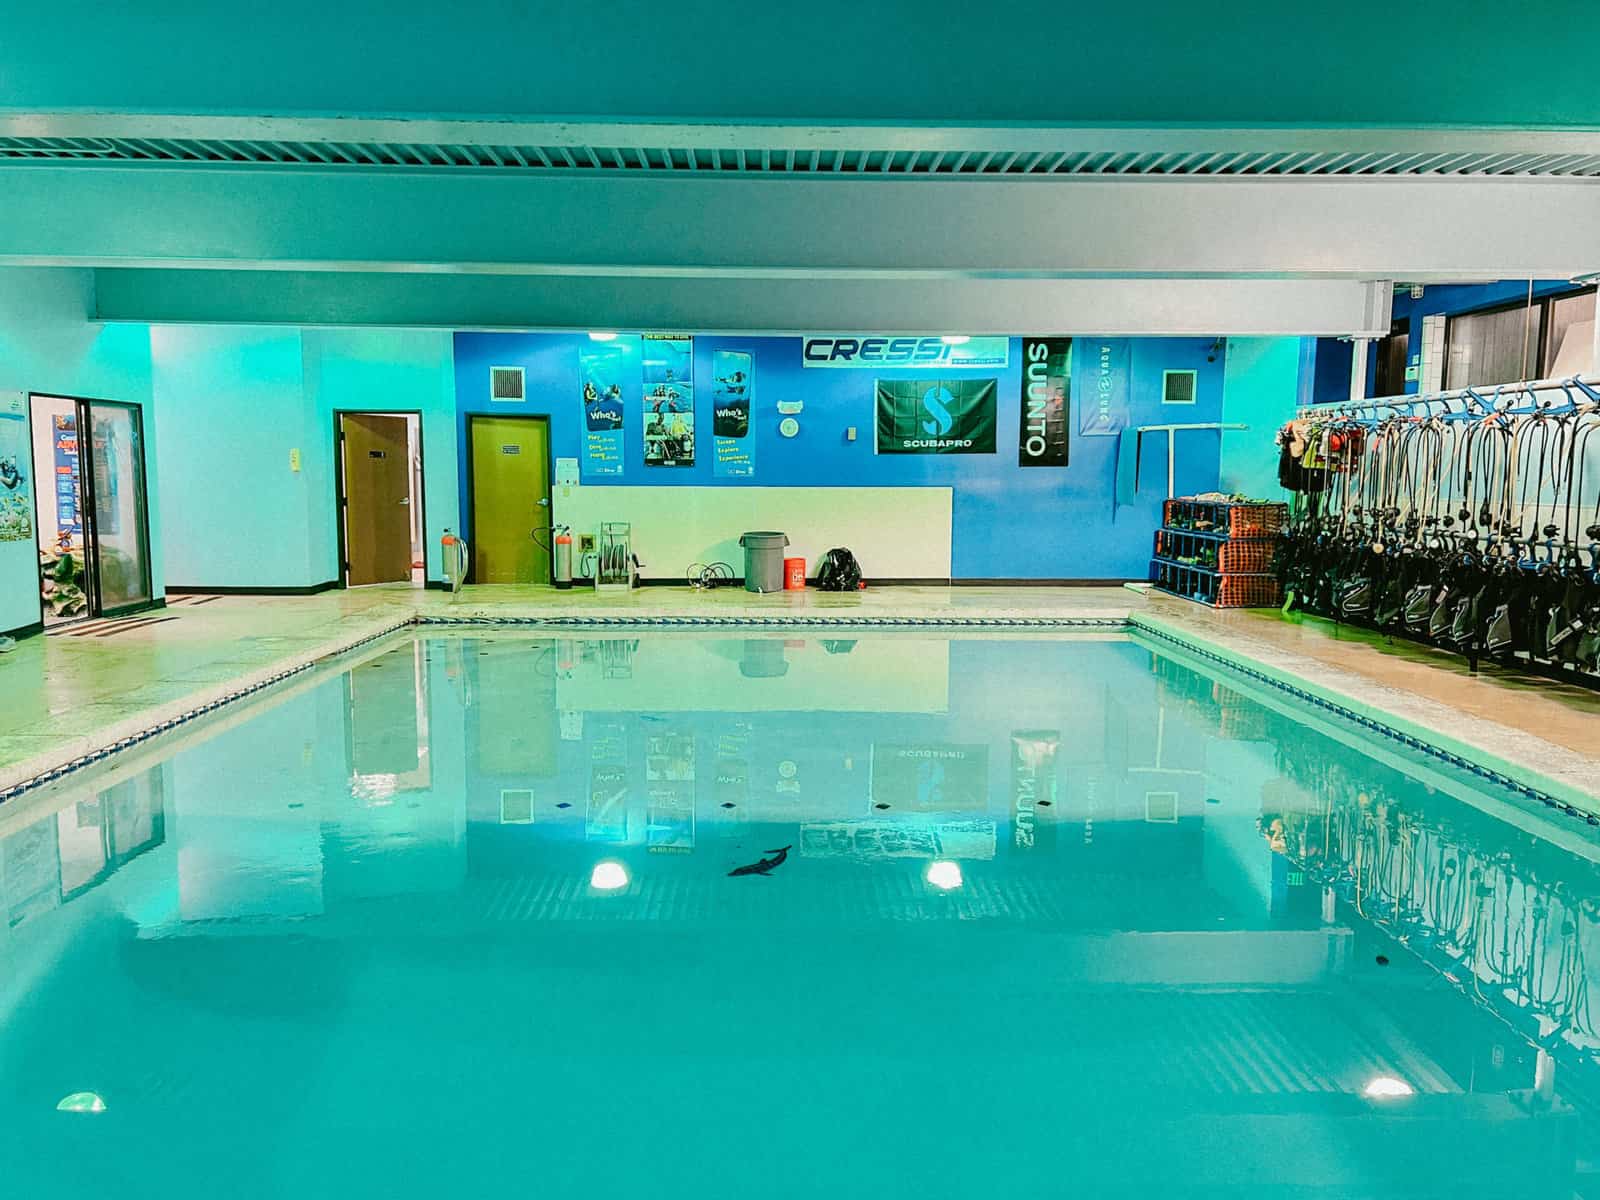 The pool underneath the dive shop.